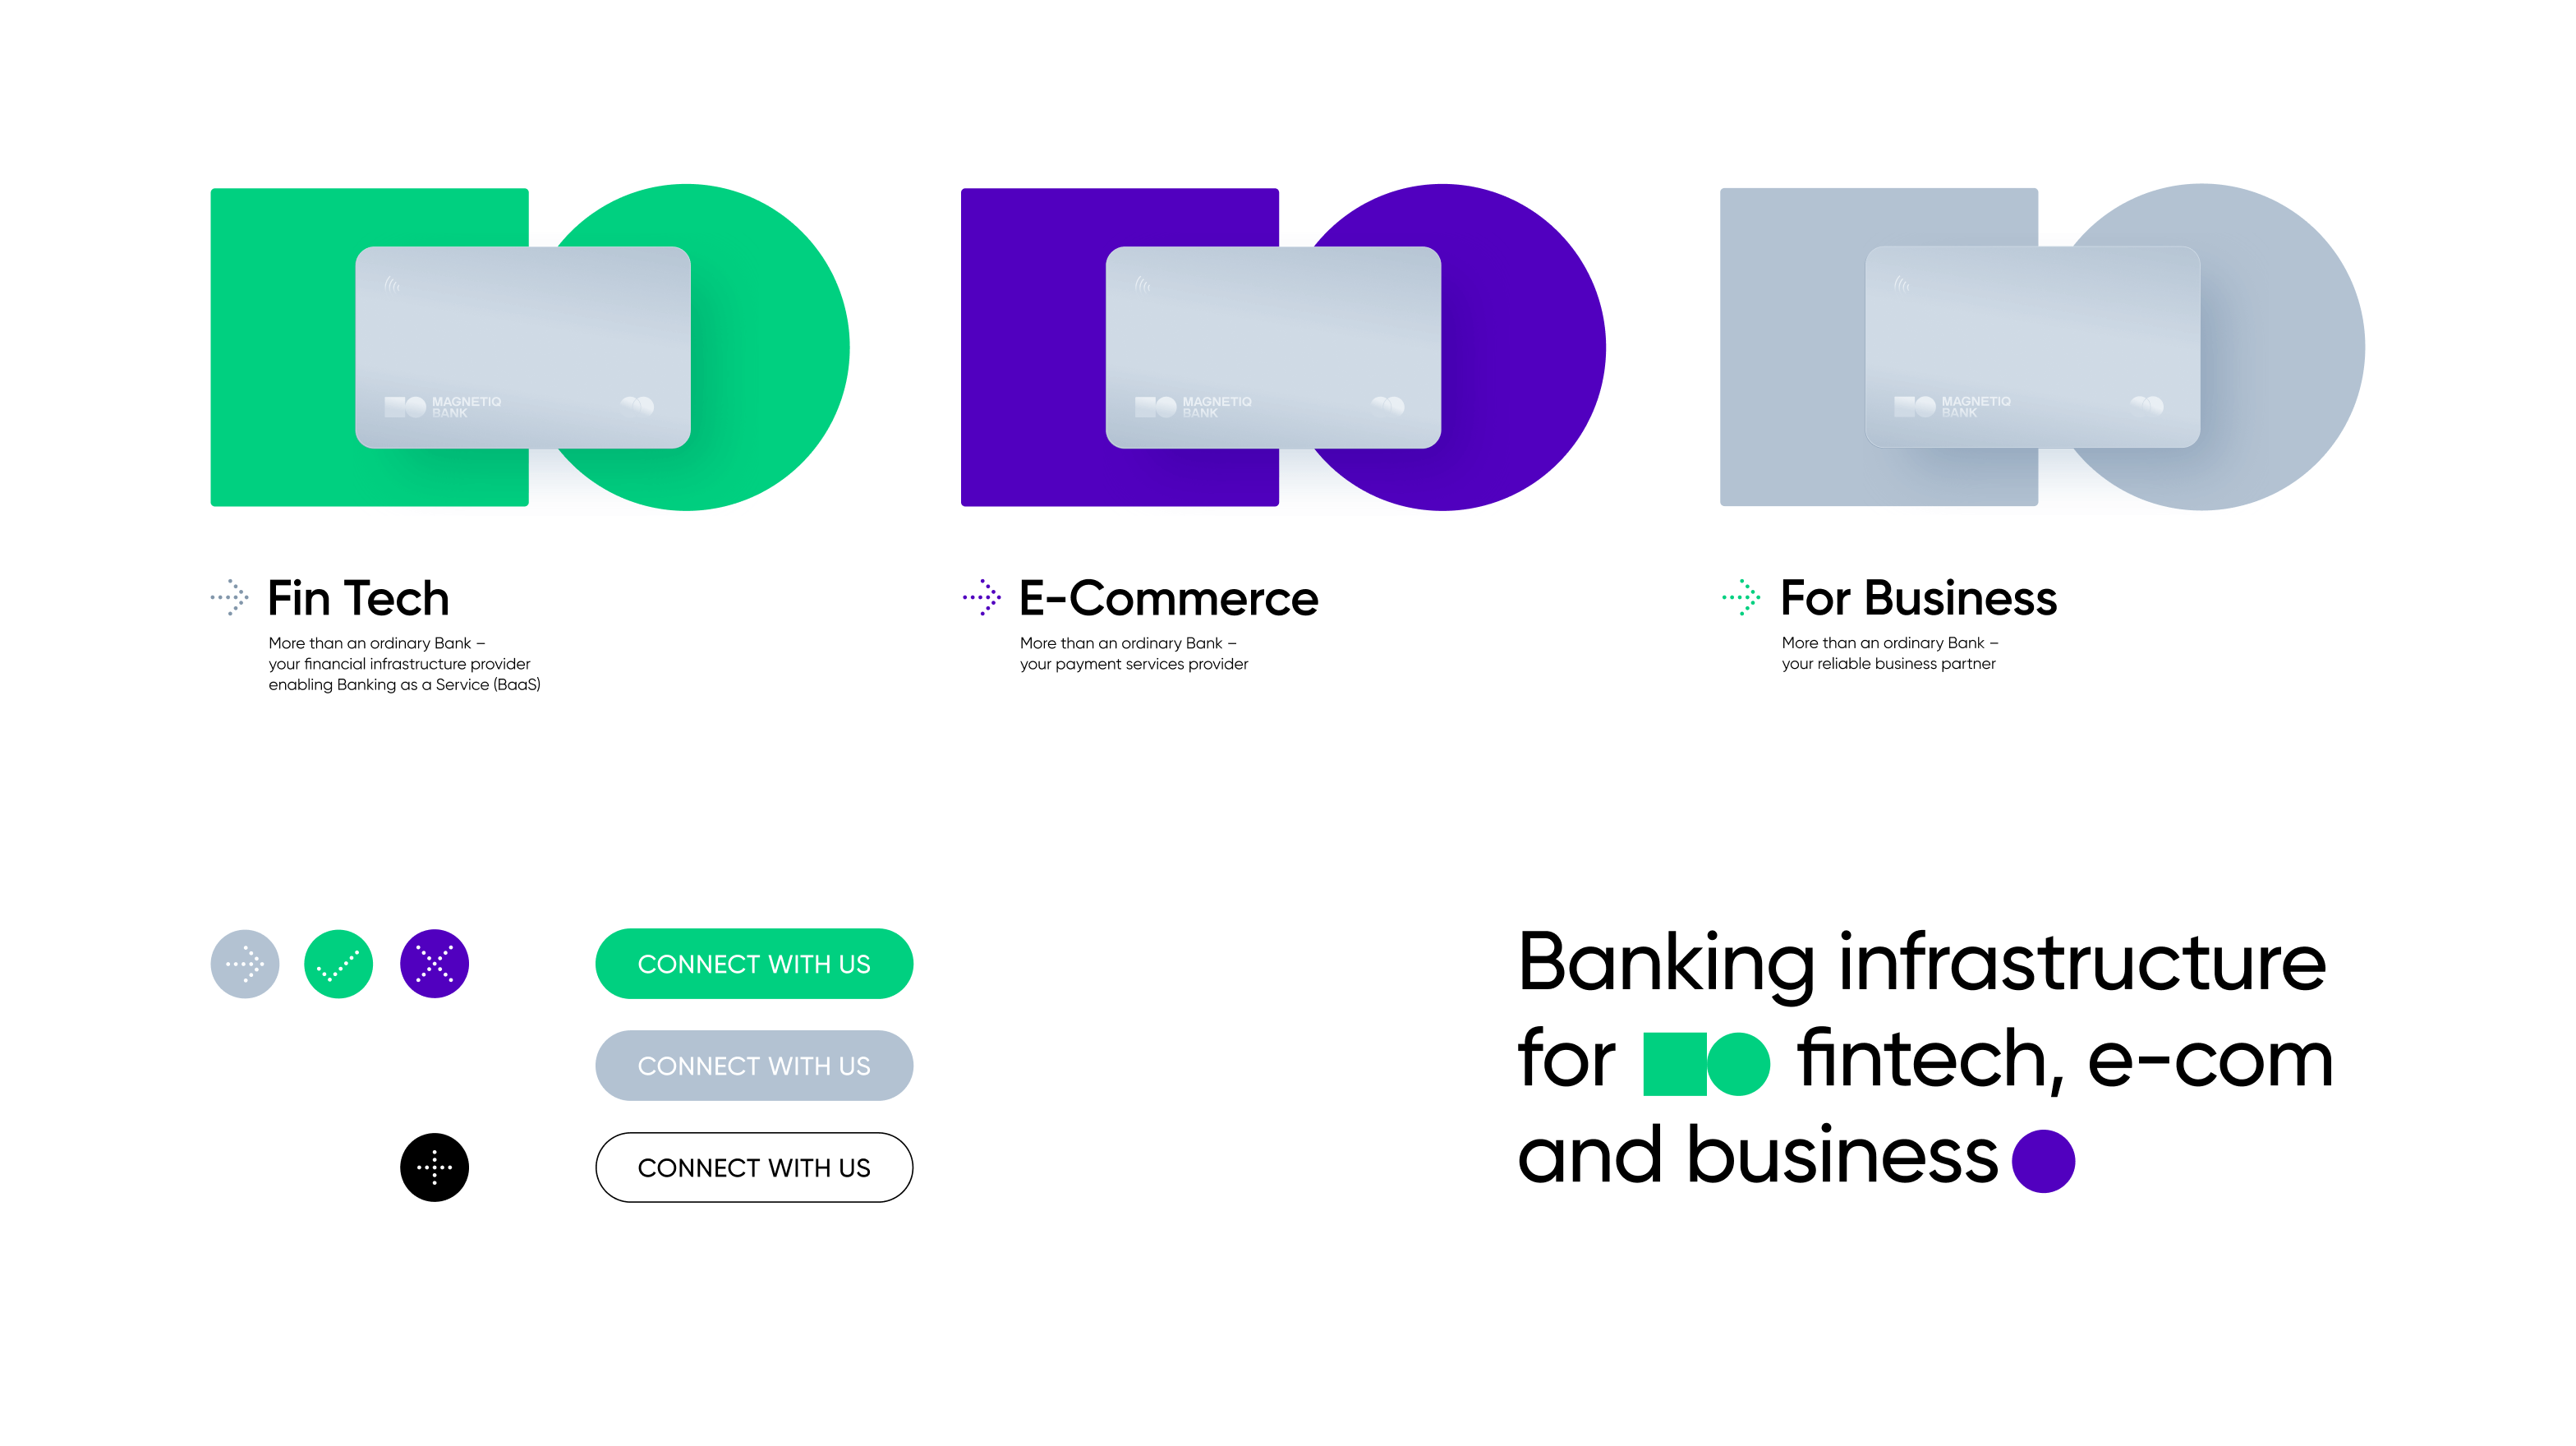 Goodface agency - Logos & brand identity - Magnetiq bank - Cards.png - Brand identity and logo design services – Goodface agency  - goodface.agency